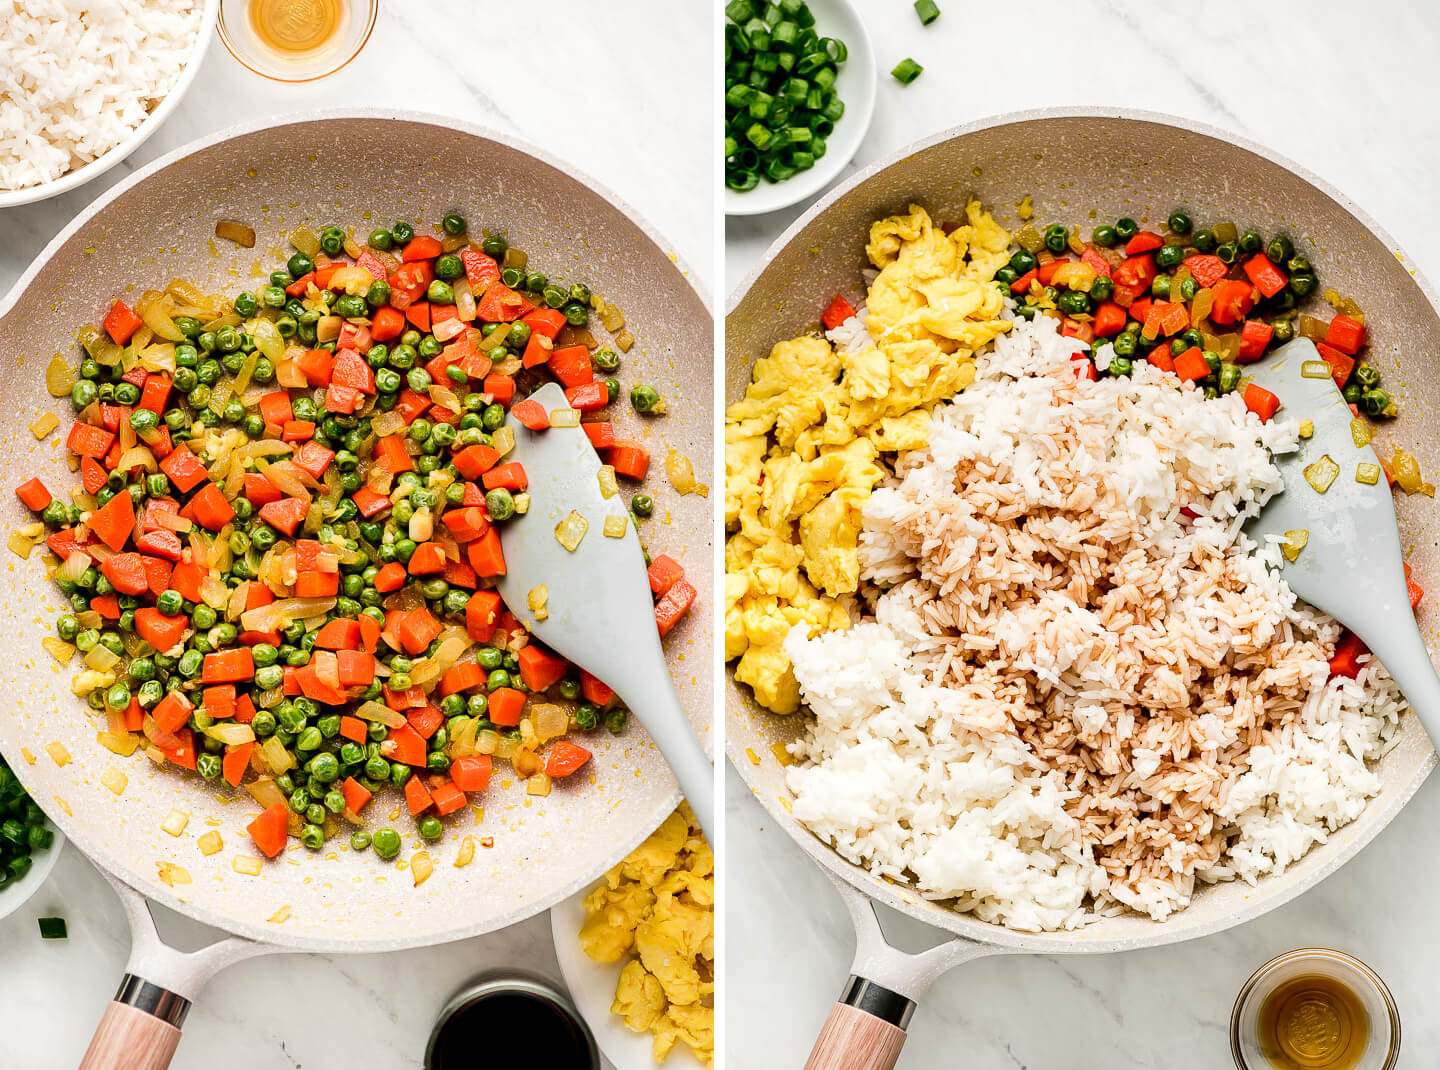 Diptych- Onions, carrots, and peas in a pan; scrambled eggs, rice, and soy sauce added.